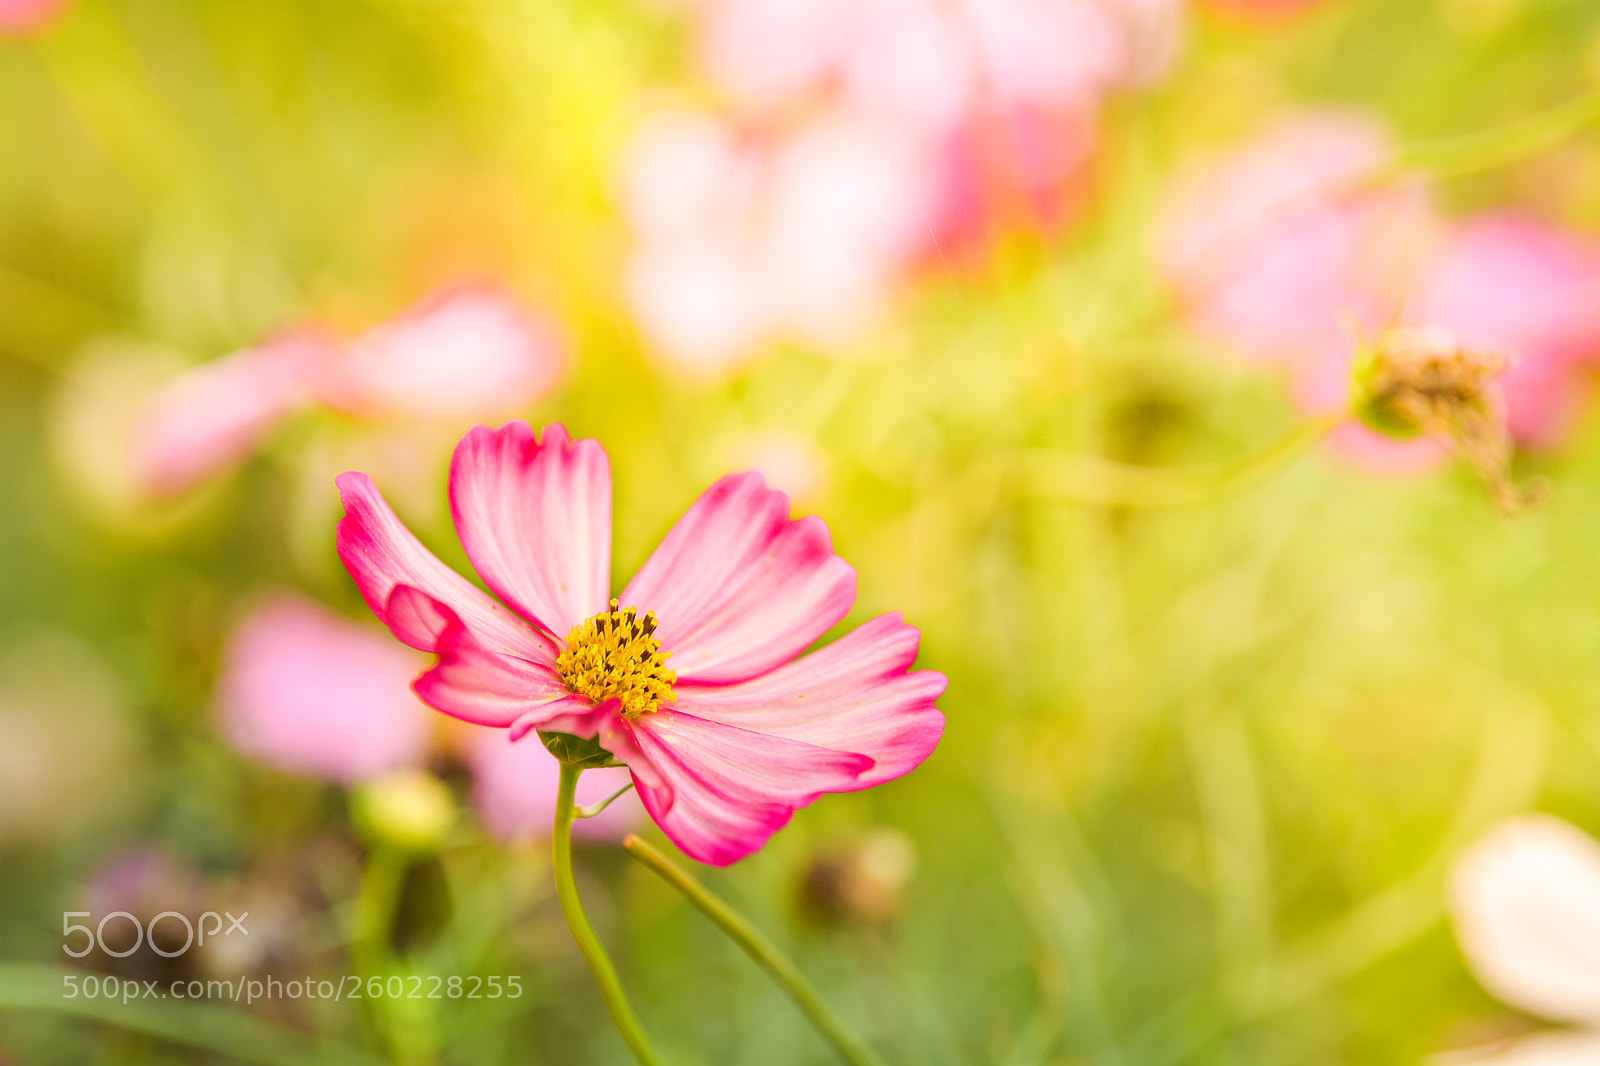 Nikon D5 sample photo. Pink cosmos flower in photography